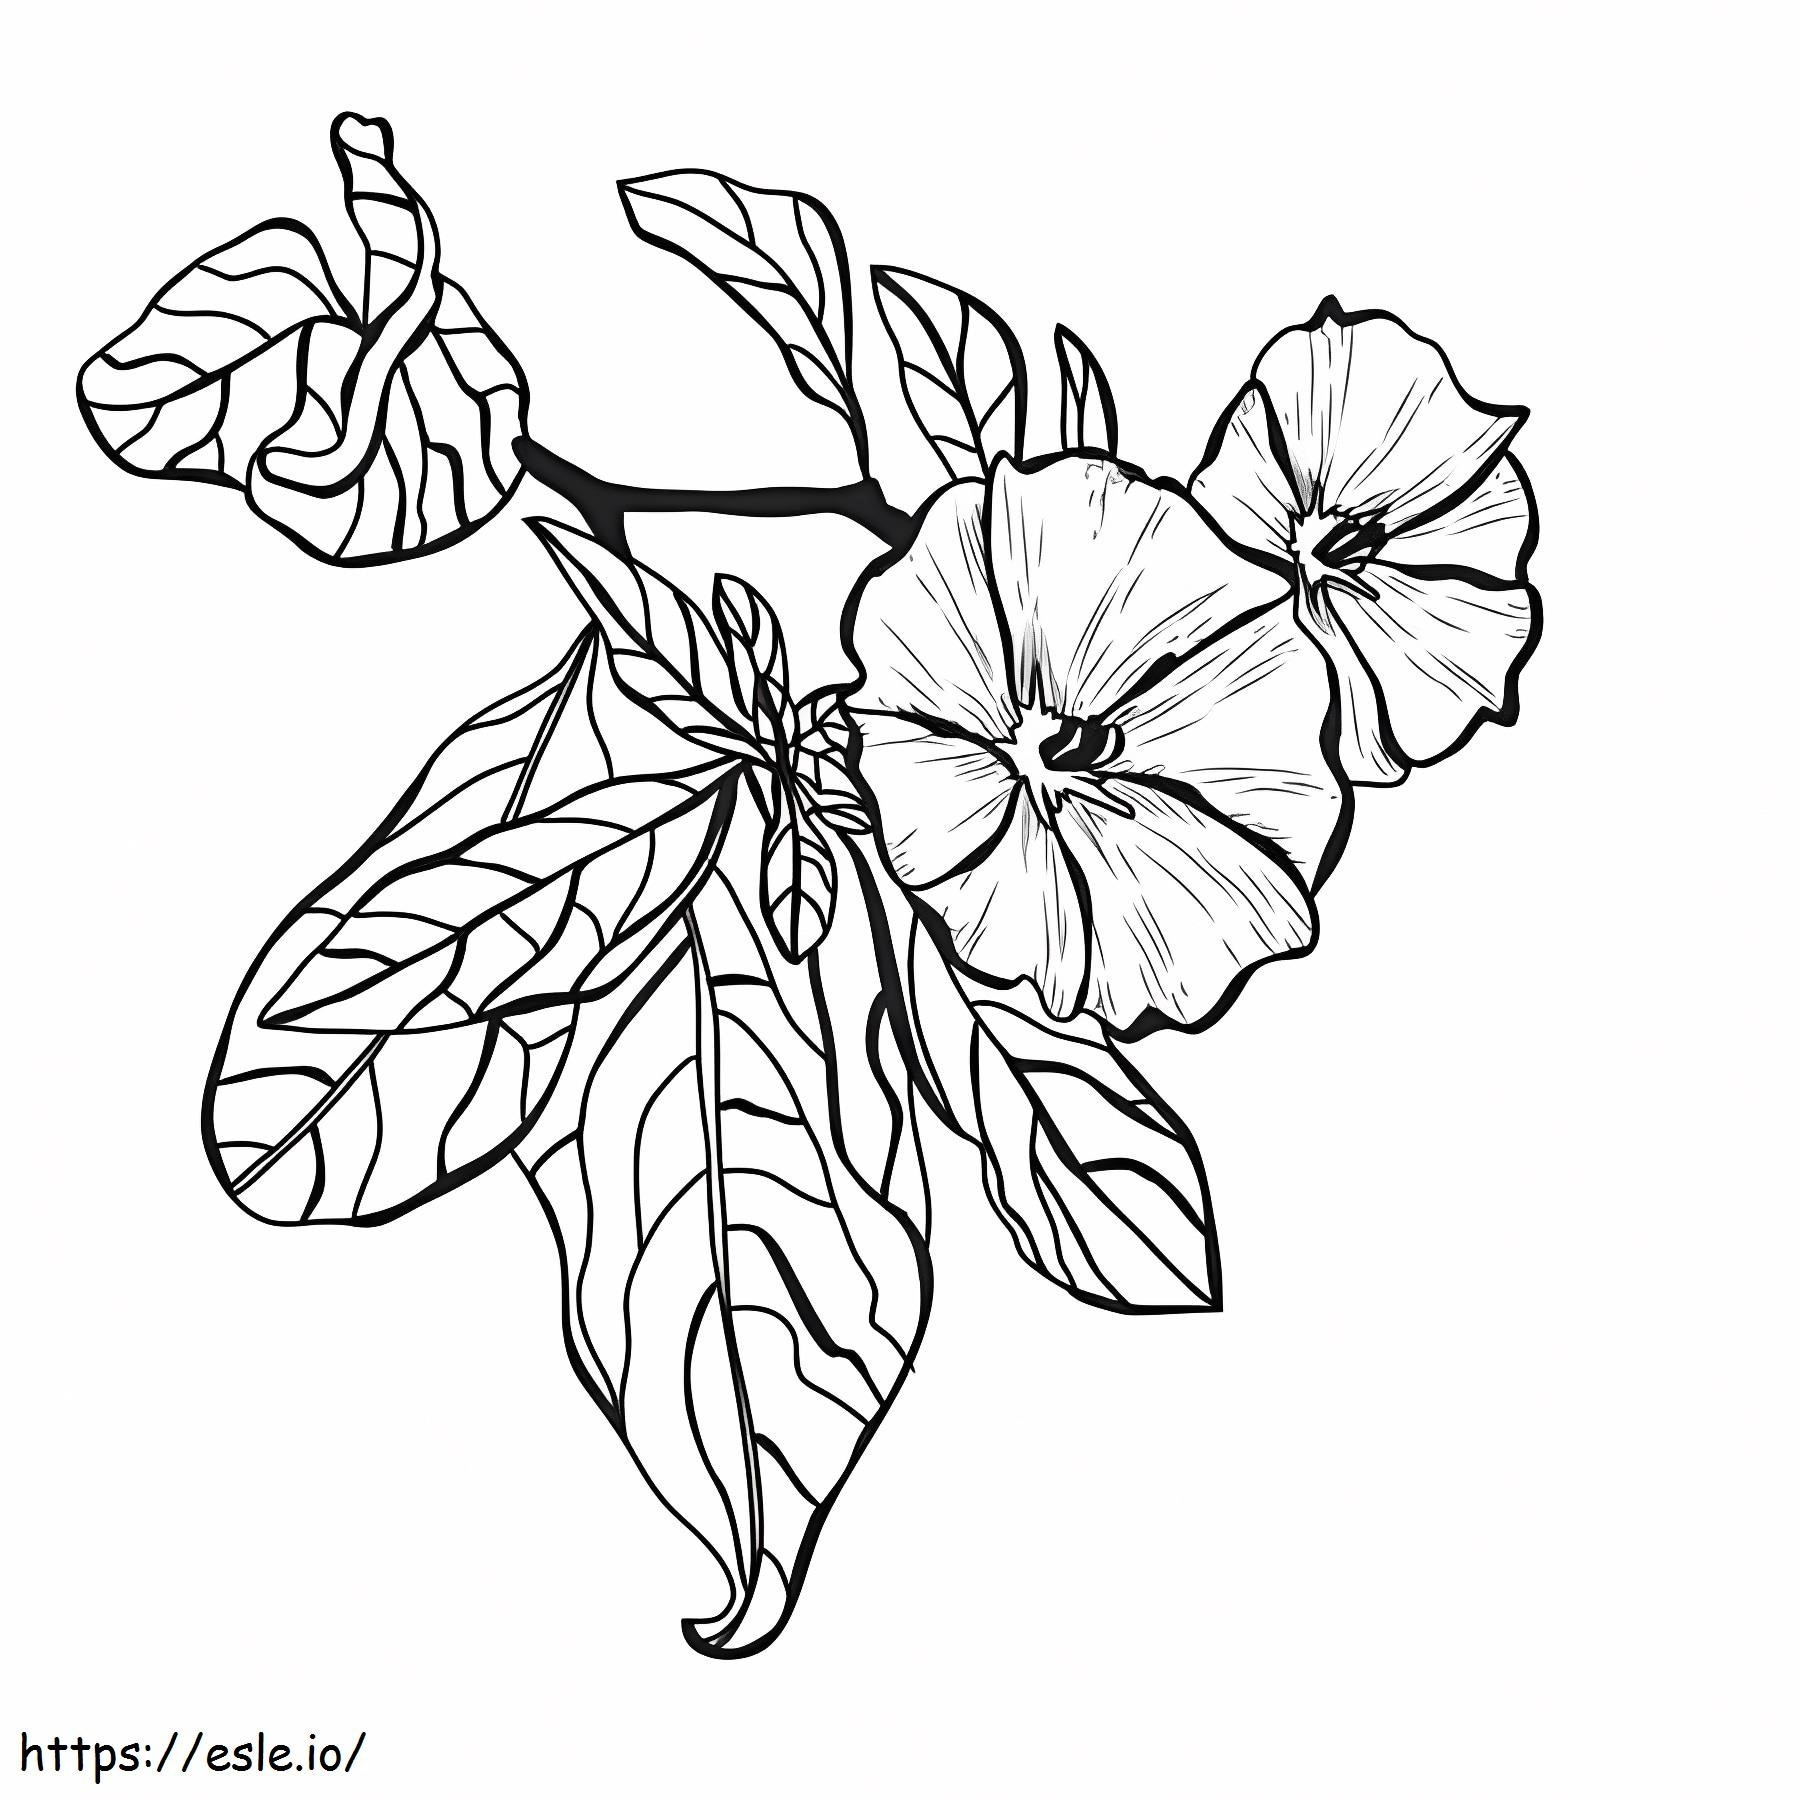 Great Clematis coloring page